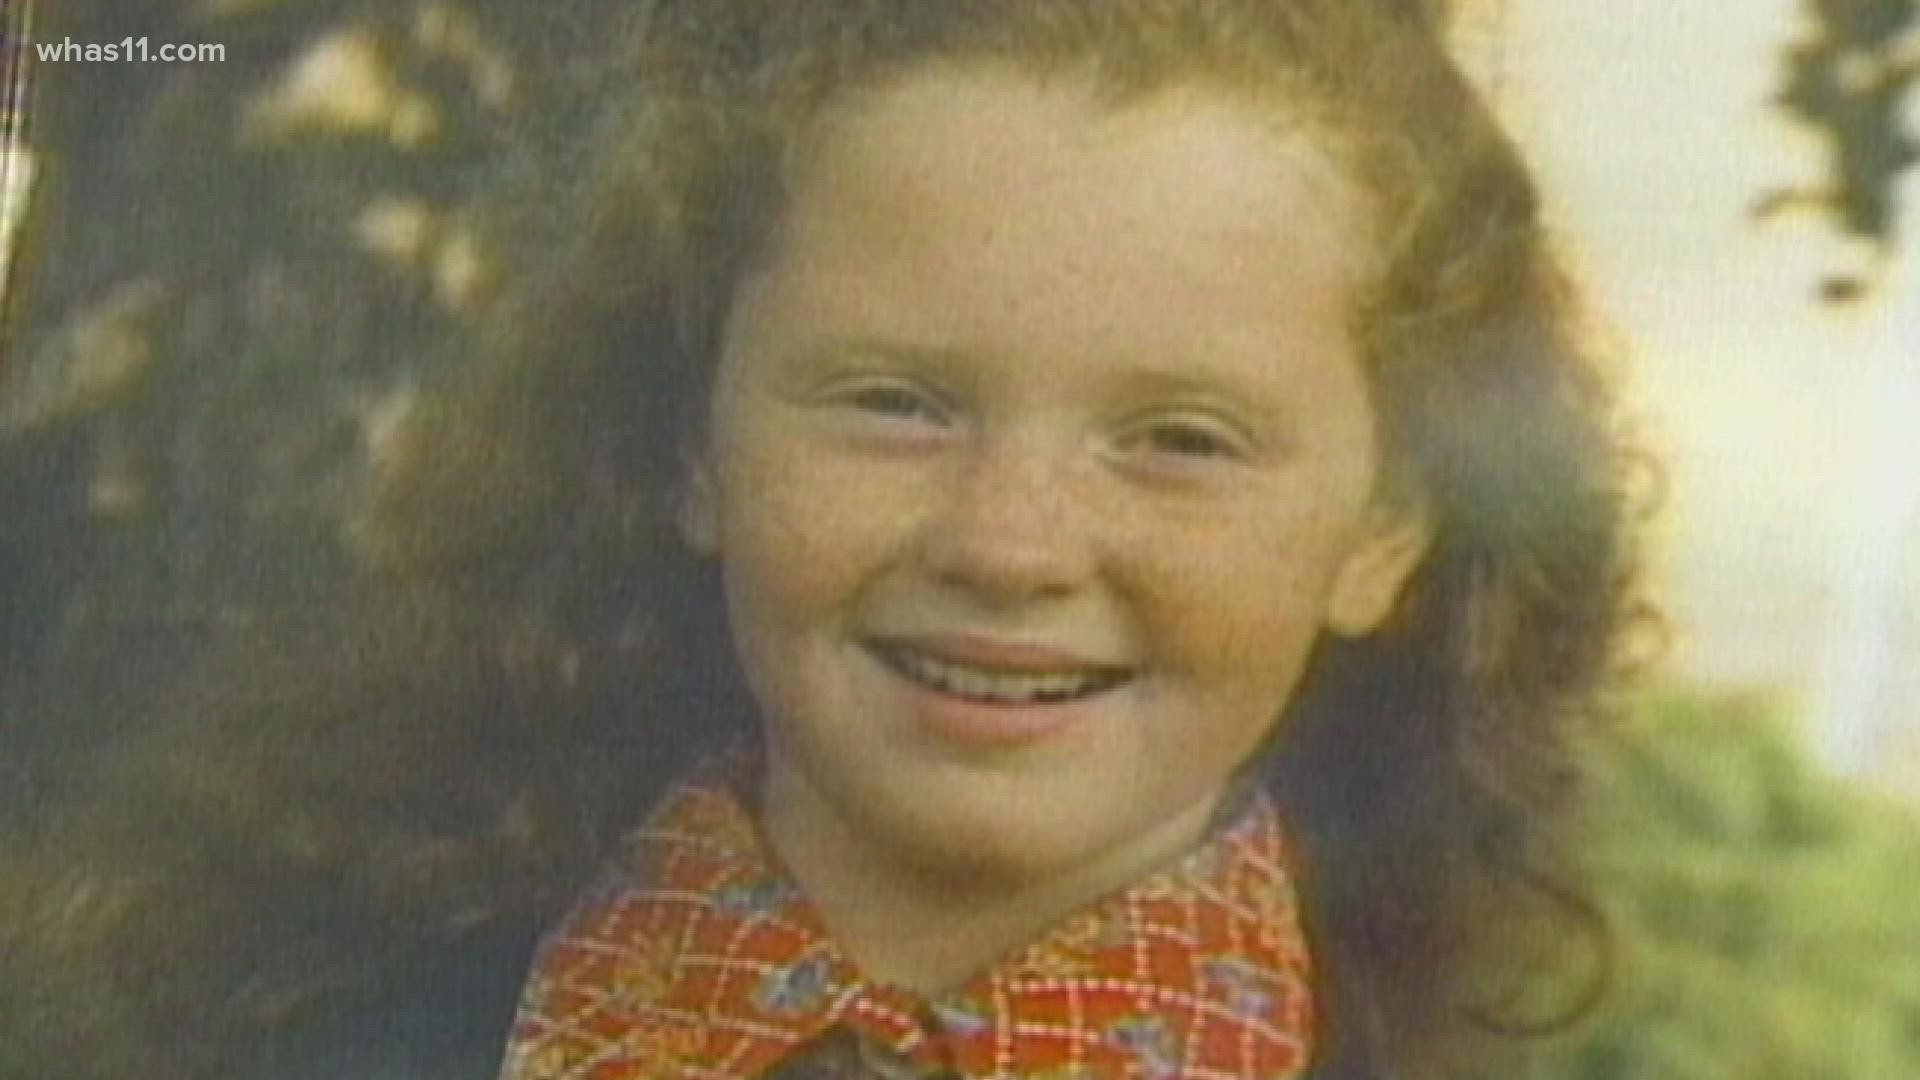 WHAS11 takes a look at some of the still images captured and the places detectives were sent on leads for Gotlib the day after she disappeared in 1983.